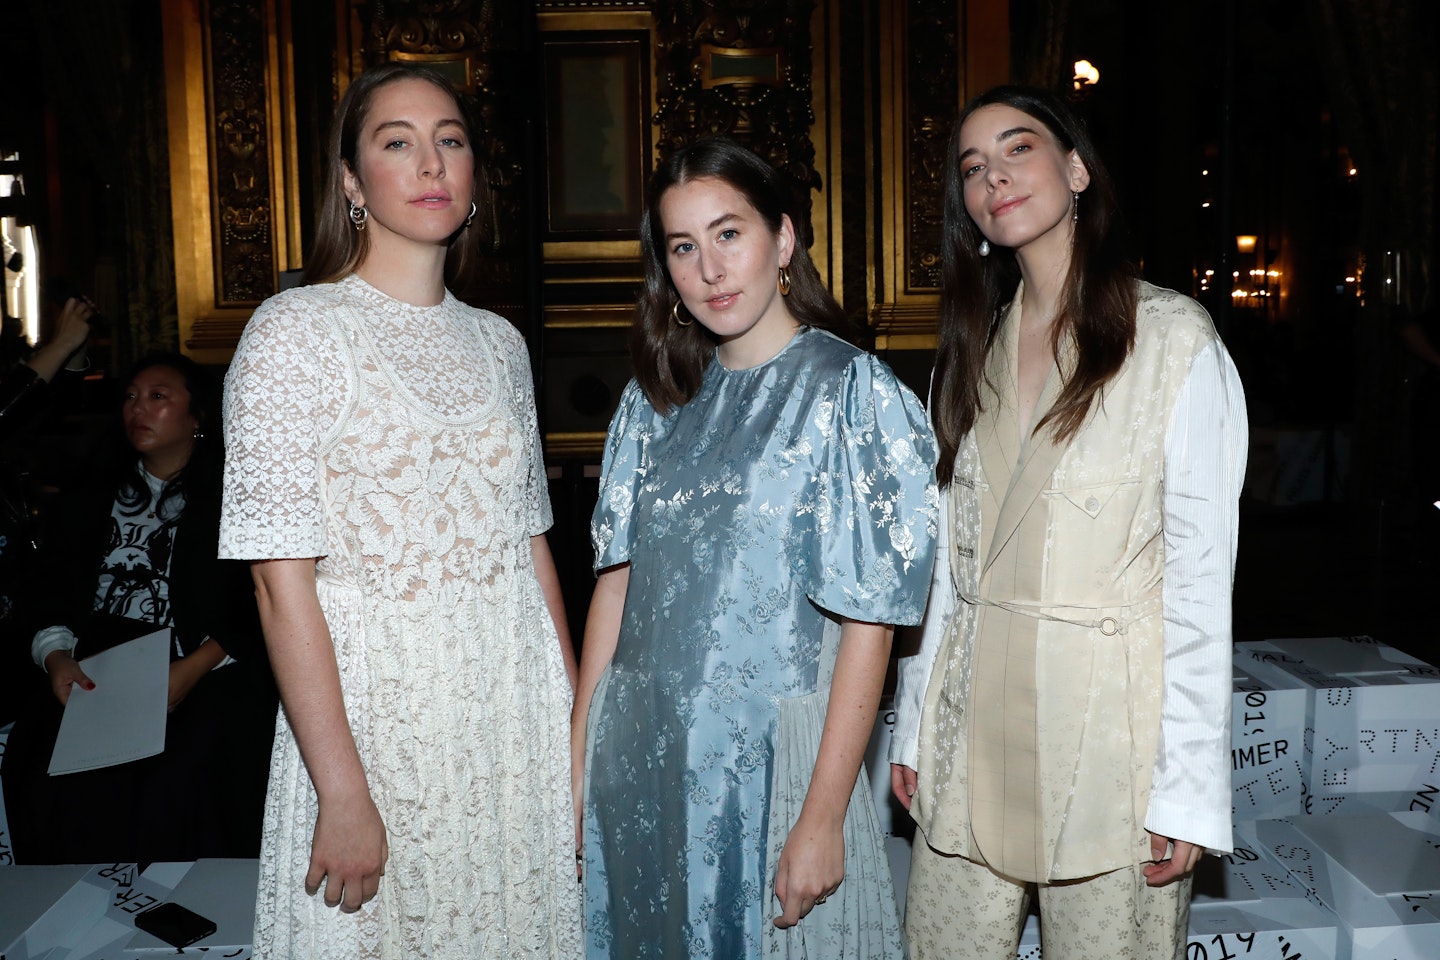 Este Haim Wants People To Stop Commenting On Her ‘Bass Face’ | Life ...